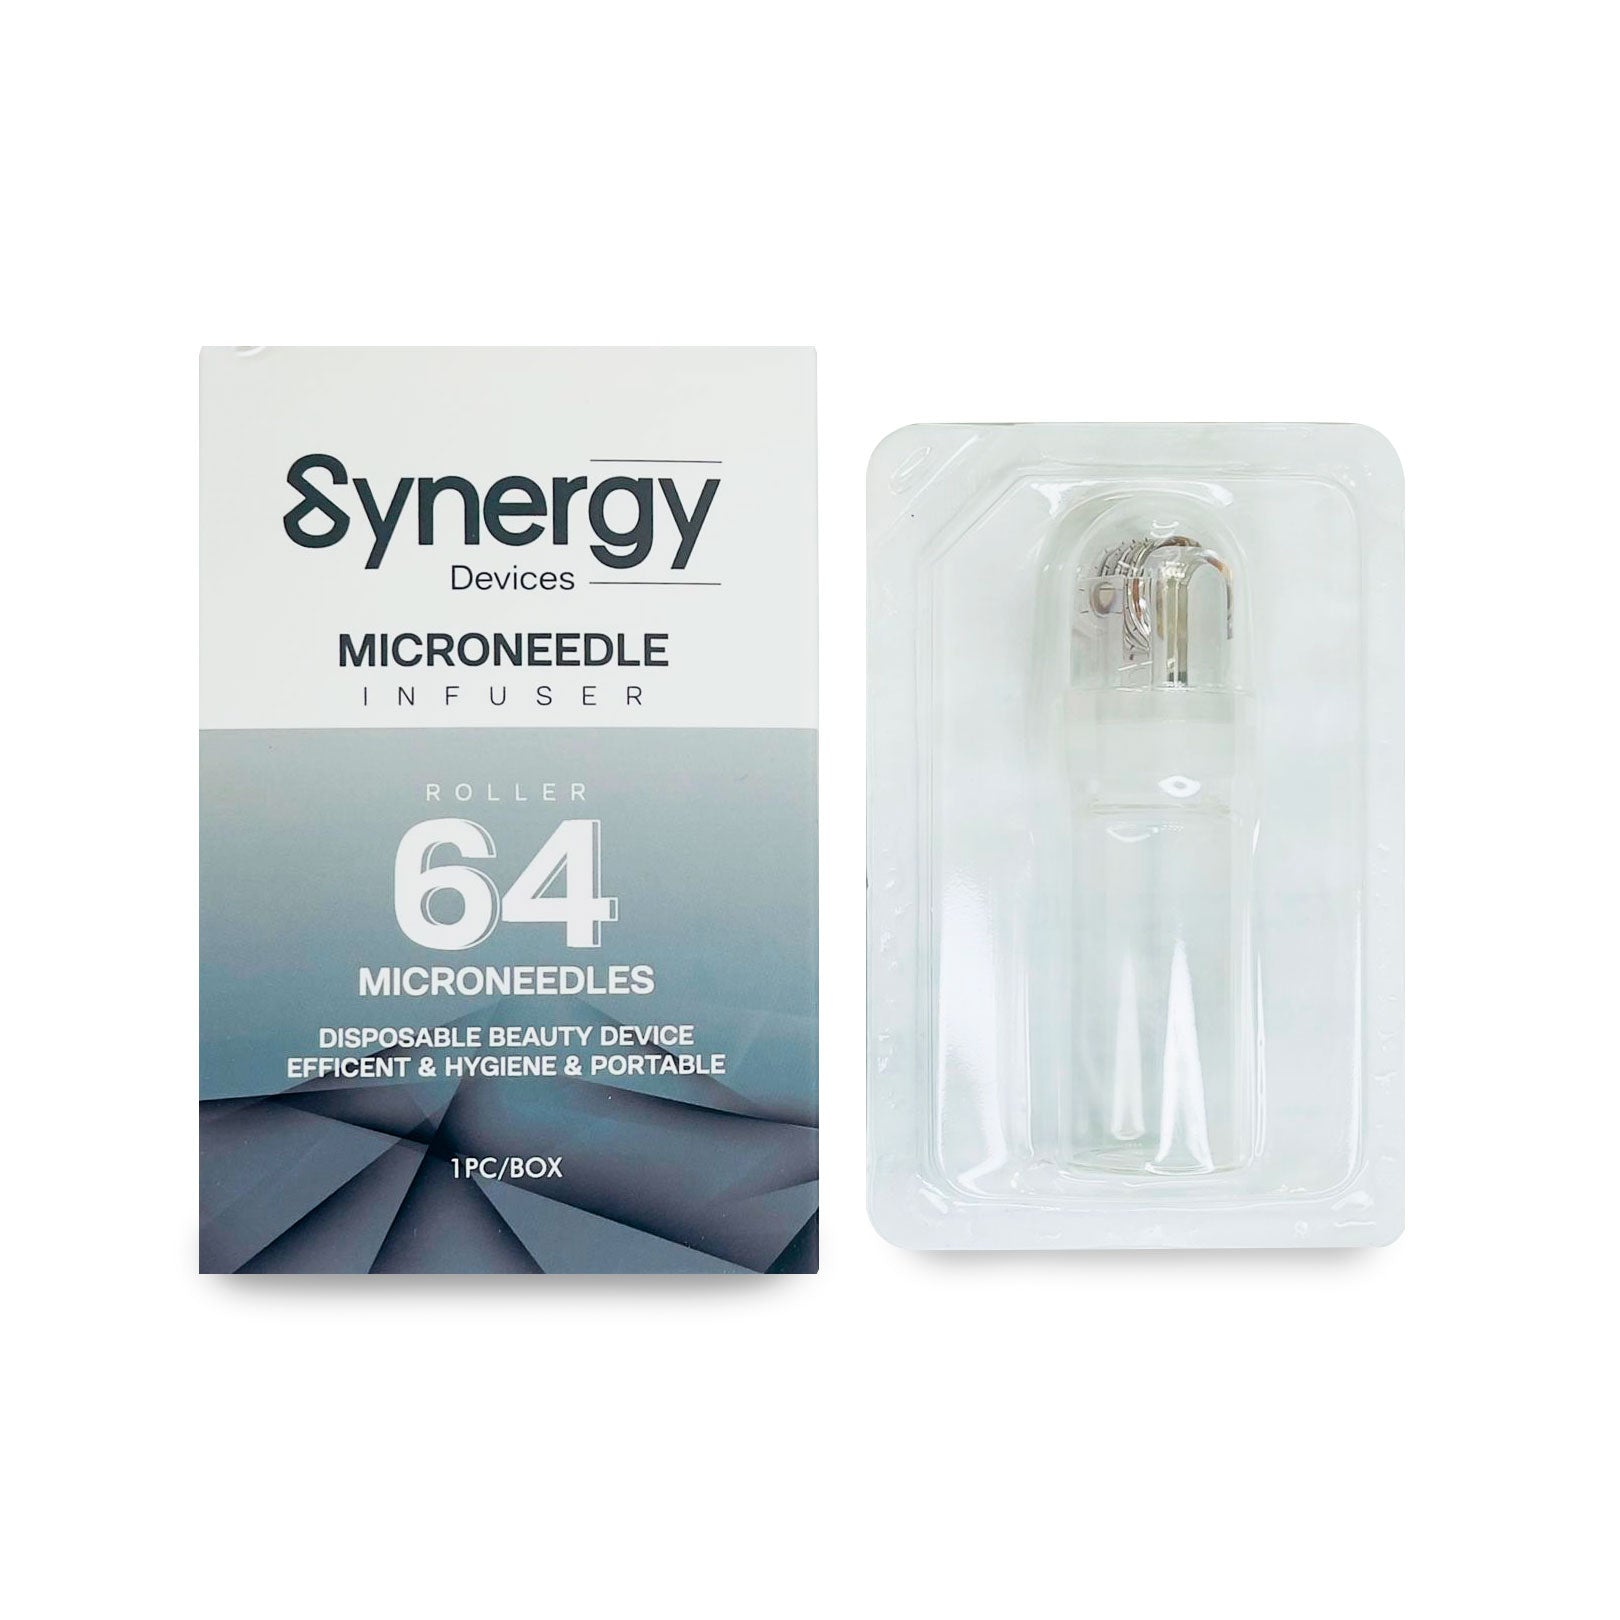 Microneedle Infuser Synergy Microagujas para Mesoterapia